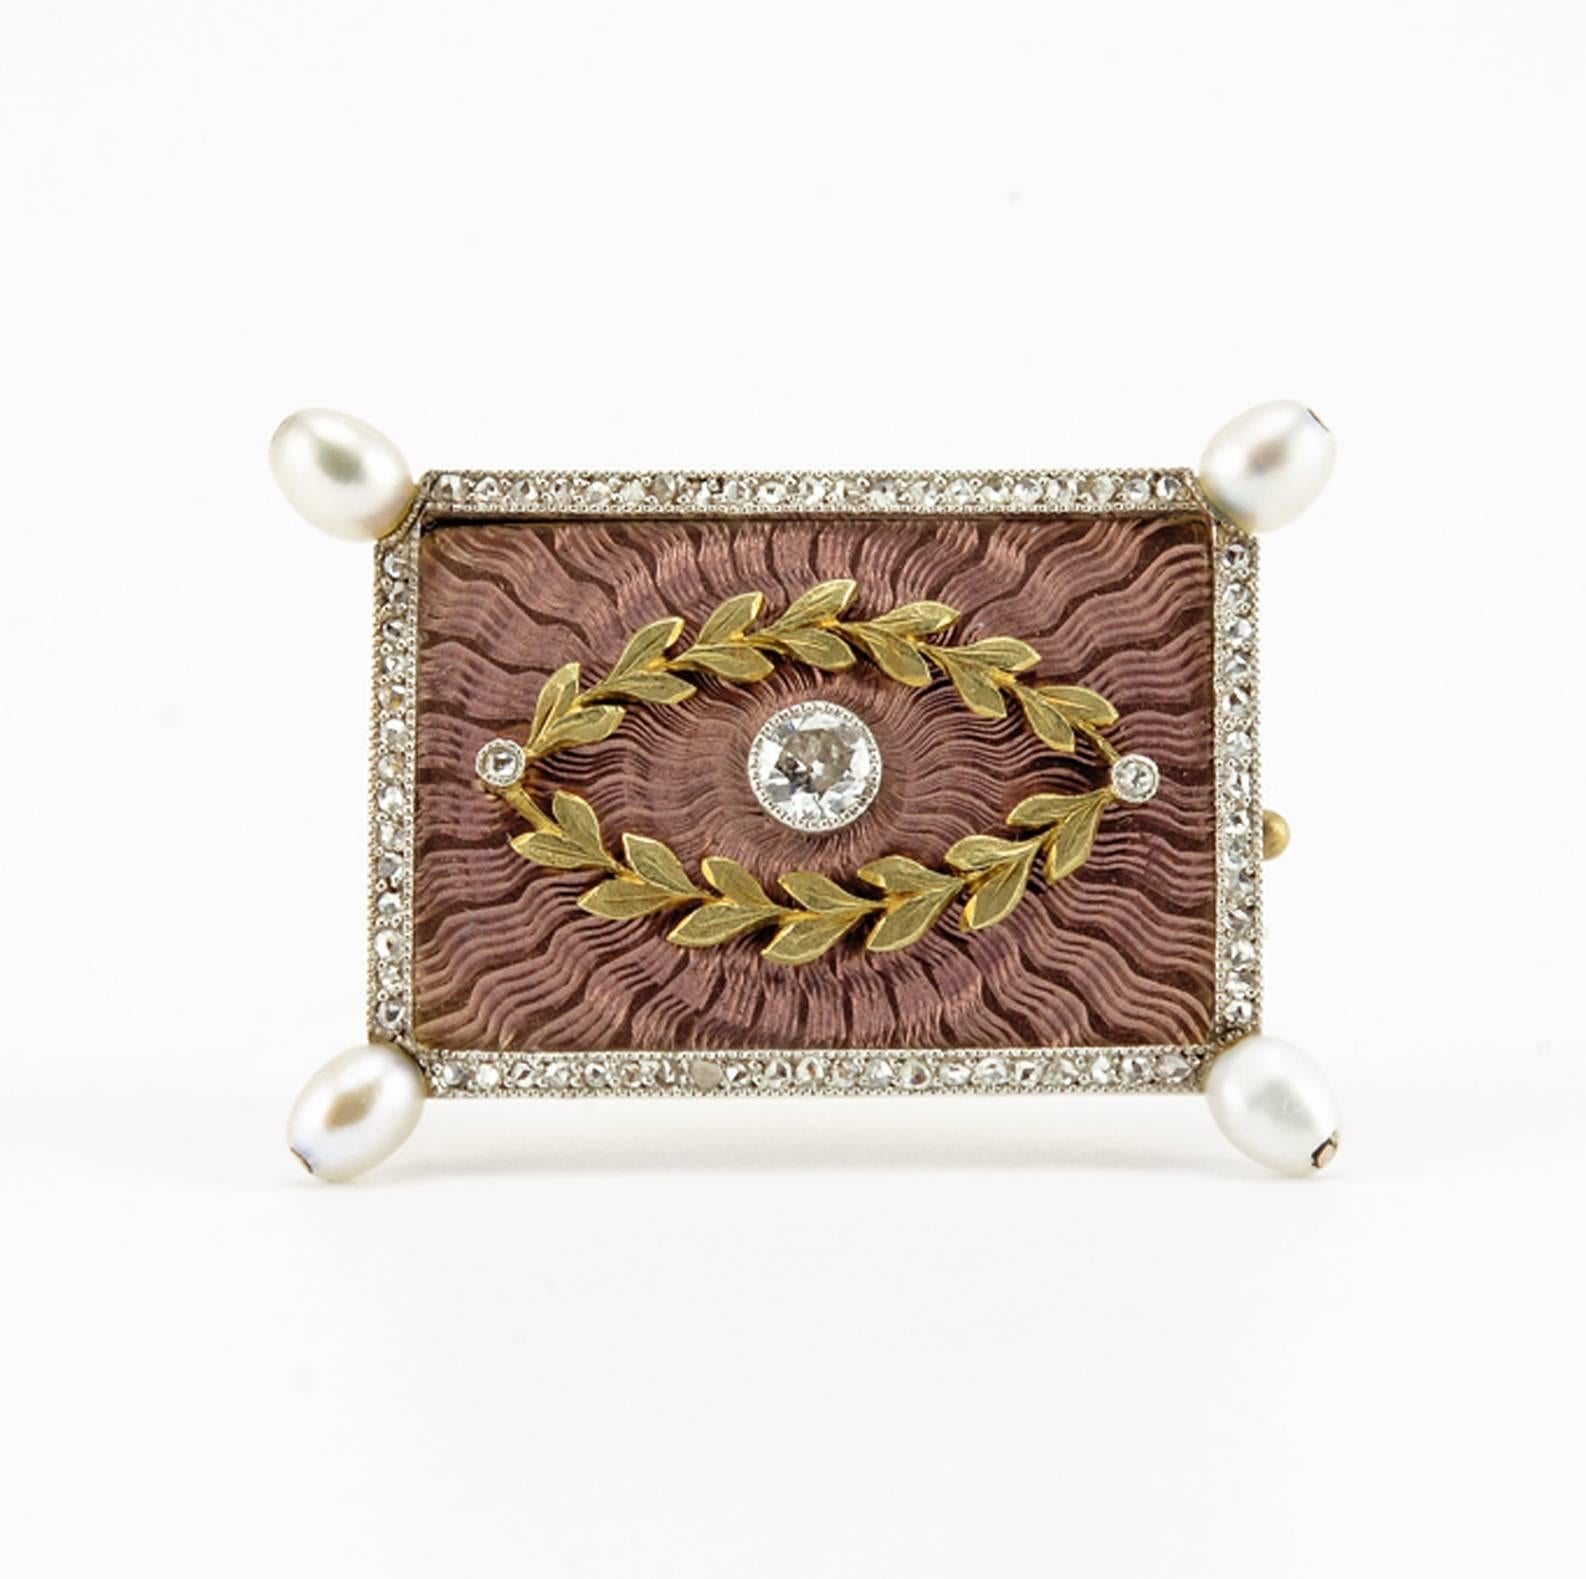 A Fabergé diamond- and pearl-set gold and guilloché enamel brooch, workmaster August Holmström, Saint Petersburg, circa 1900, with original scratched Fabergé inventory number 93517. Rectangular, the four corners set with pearl finials, enameled